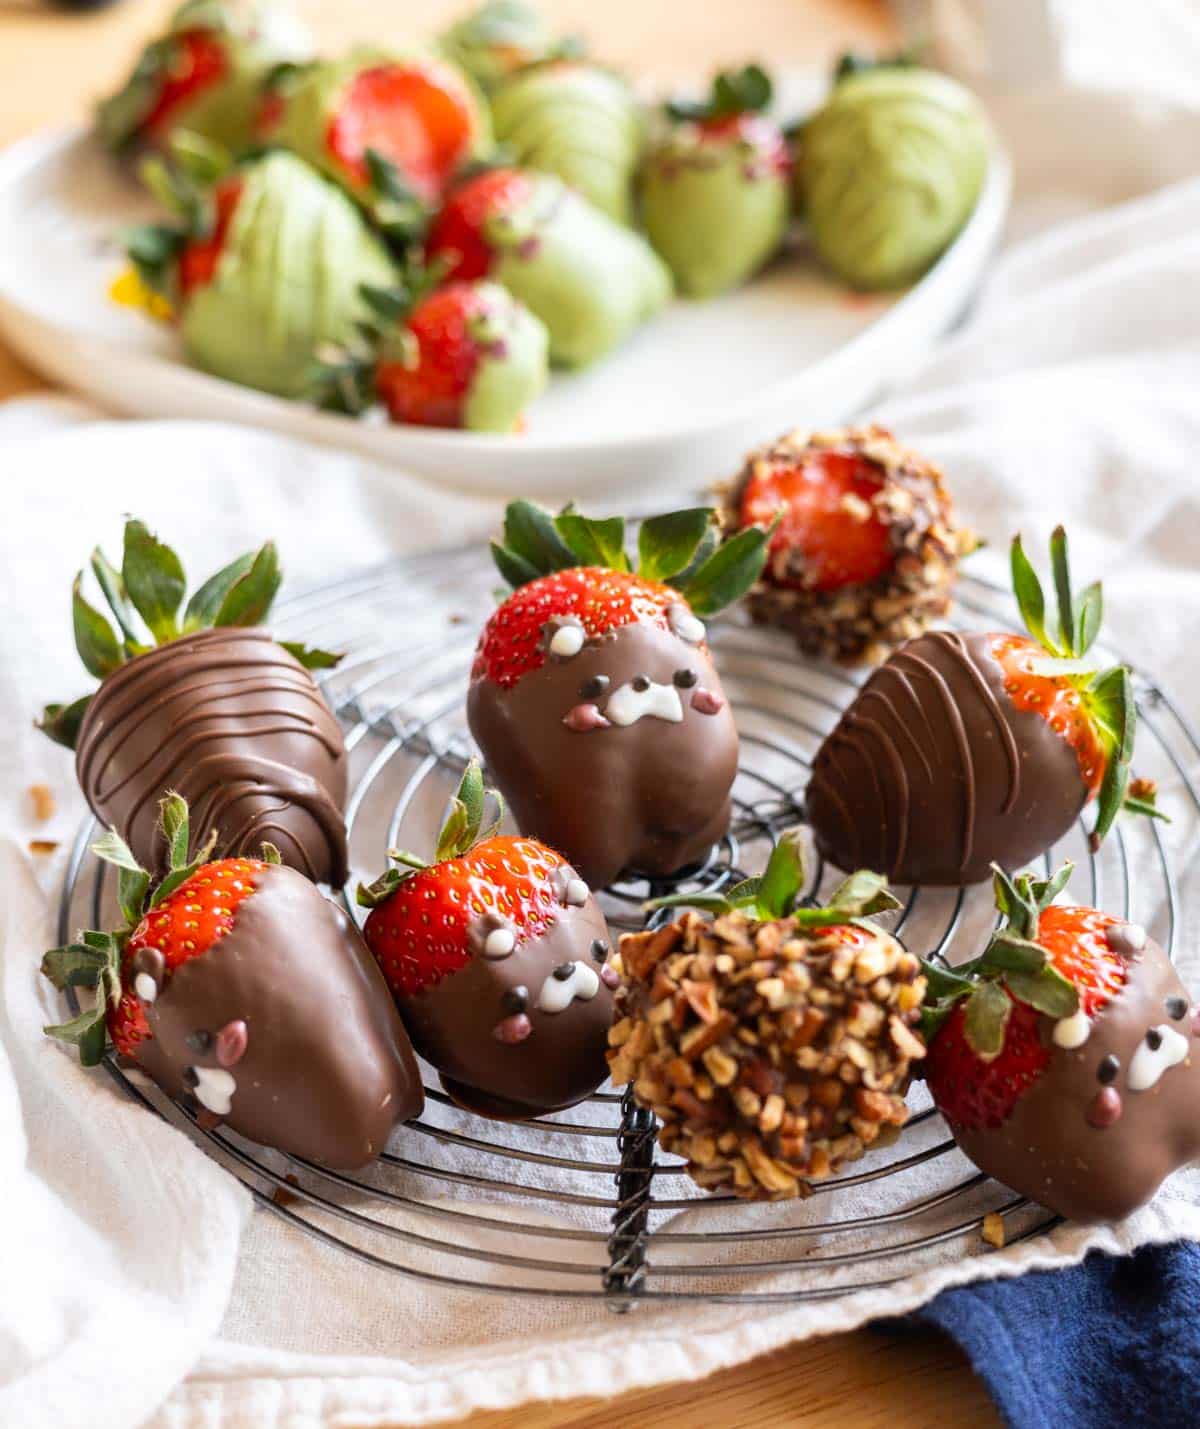 Cute chocolate-dipped strawberries decorated as bears.